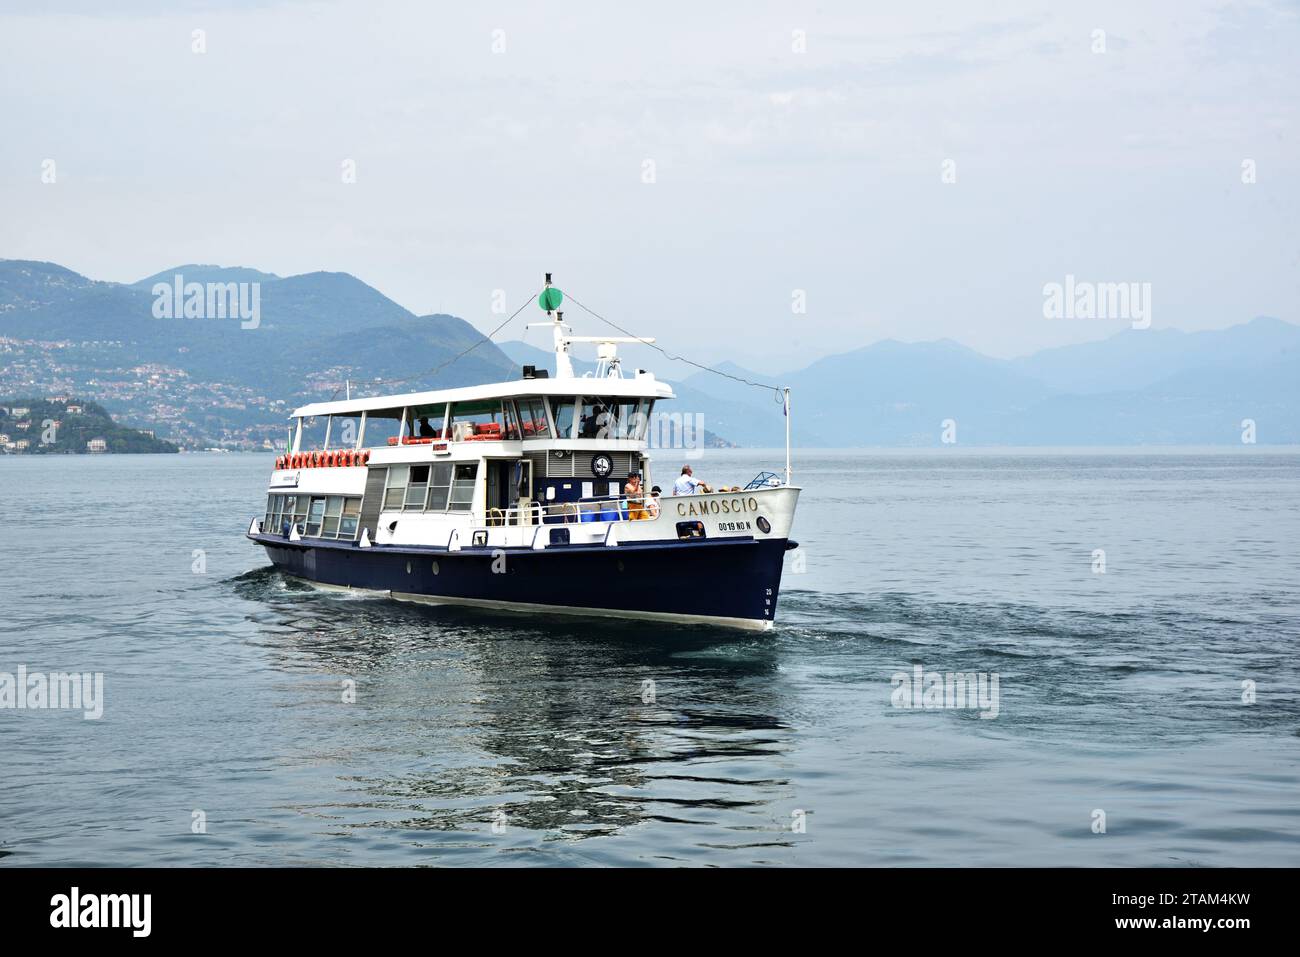 The passenger ferry Camoscio reverses from the pier at Stresa on Lake Maggiore. Built in 1972, it is one of six vessels in the Alpino class. Stock Photo